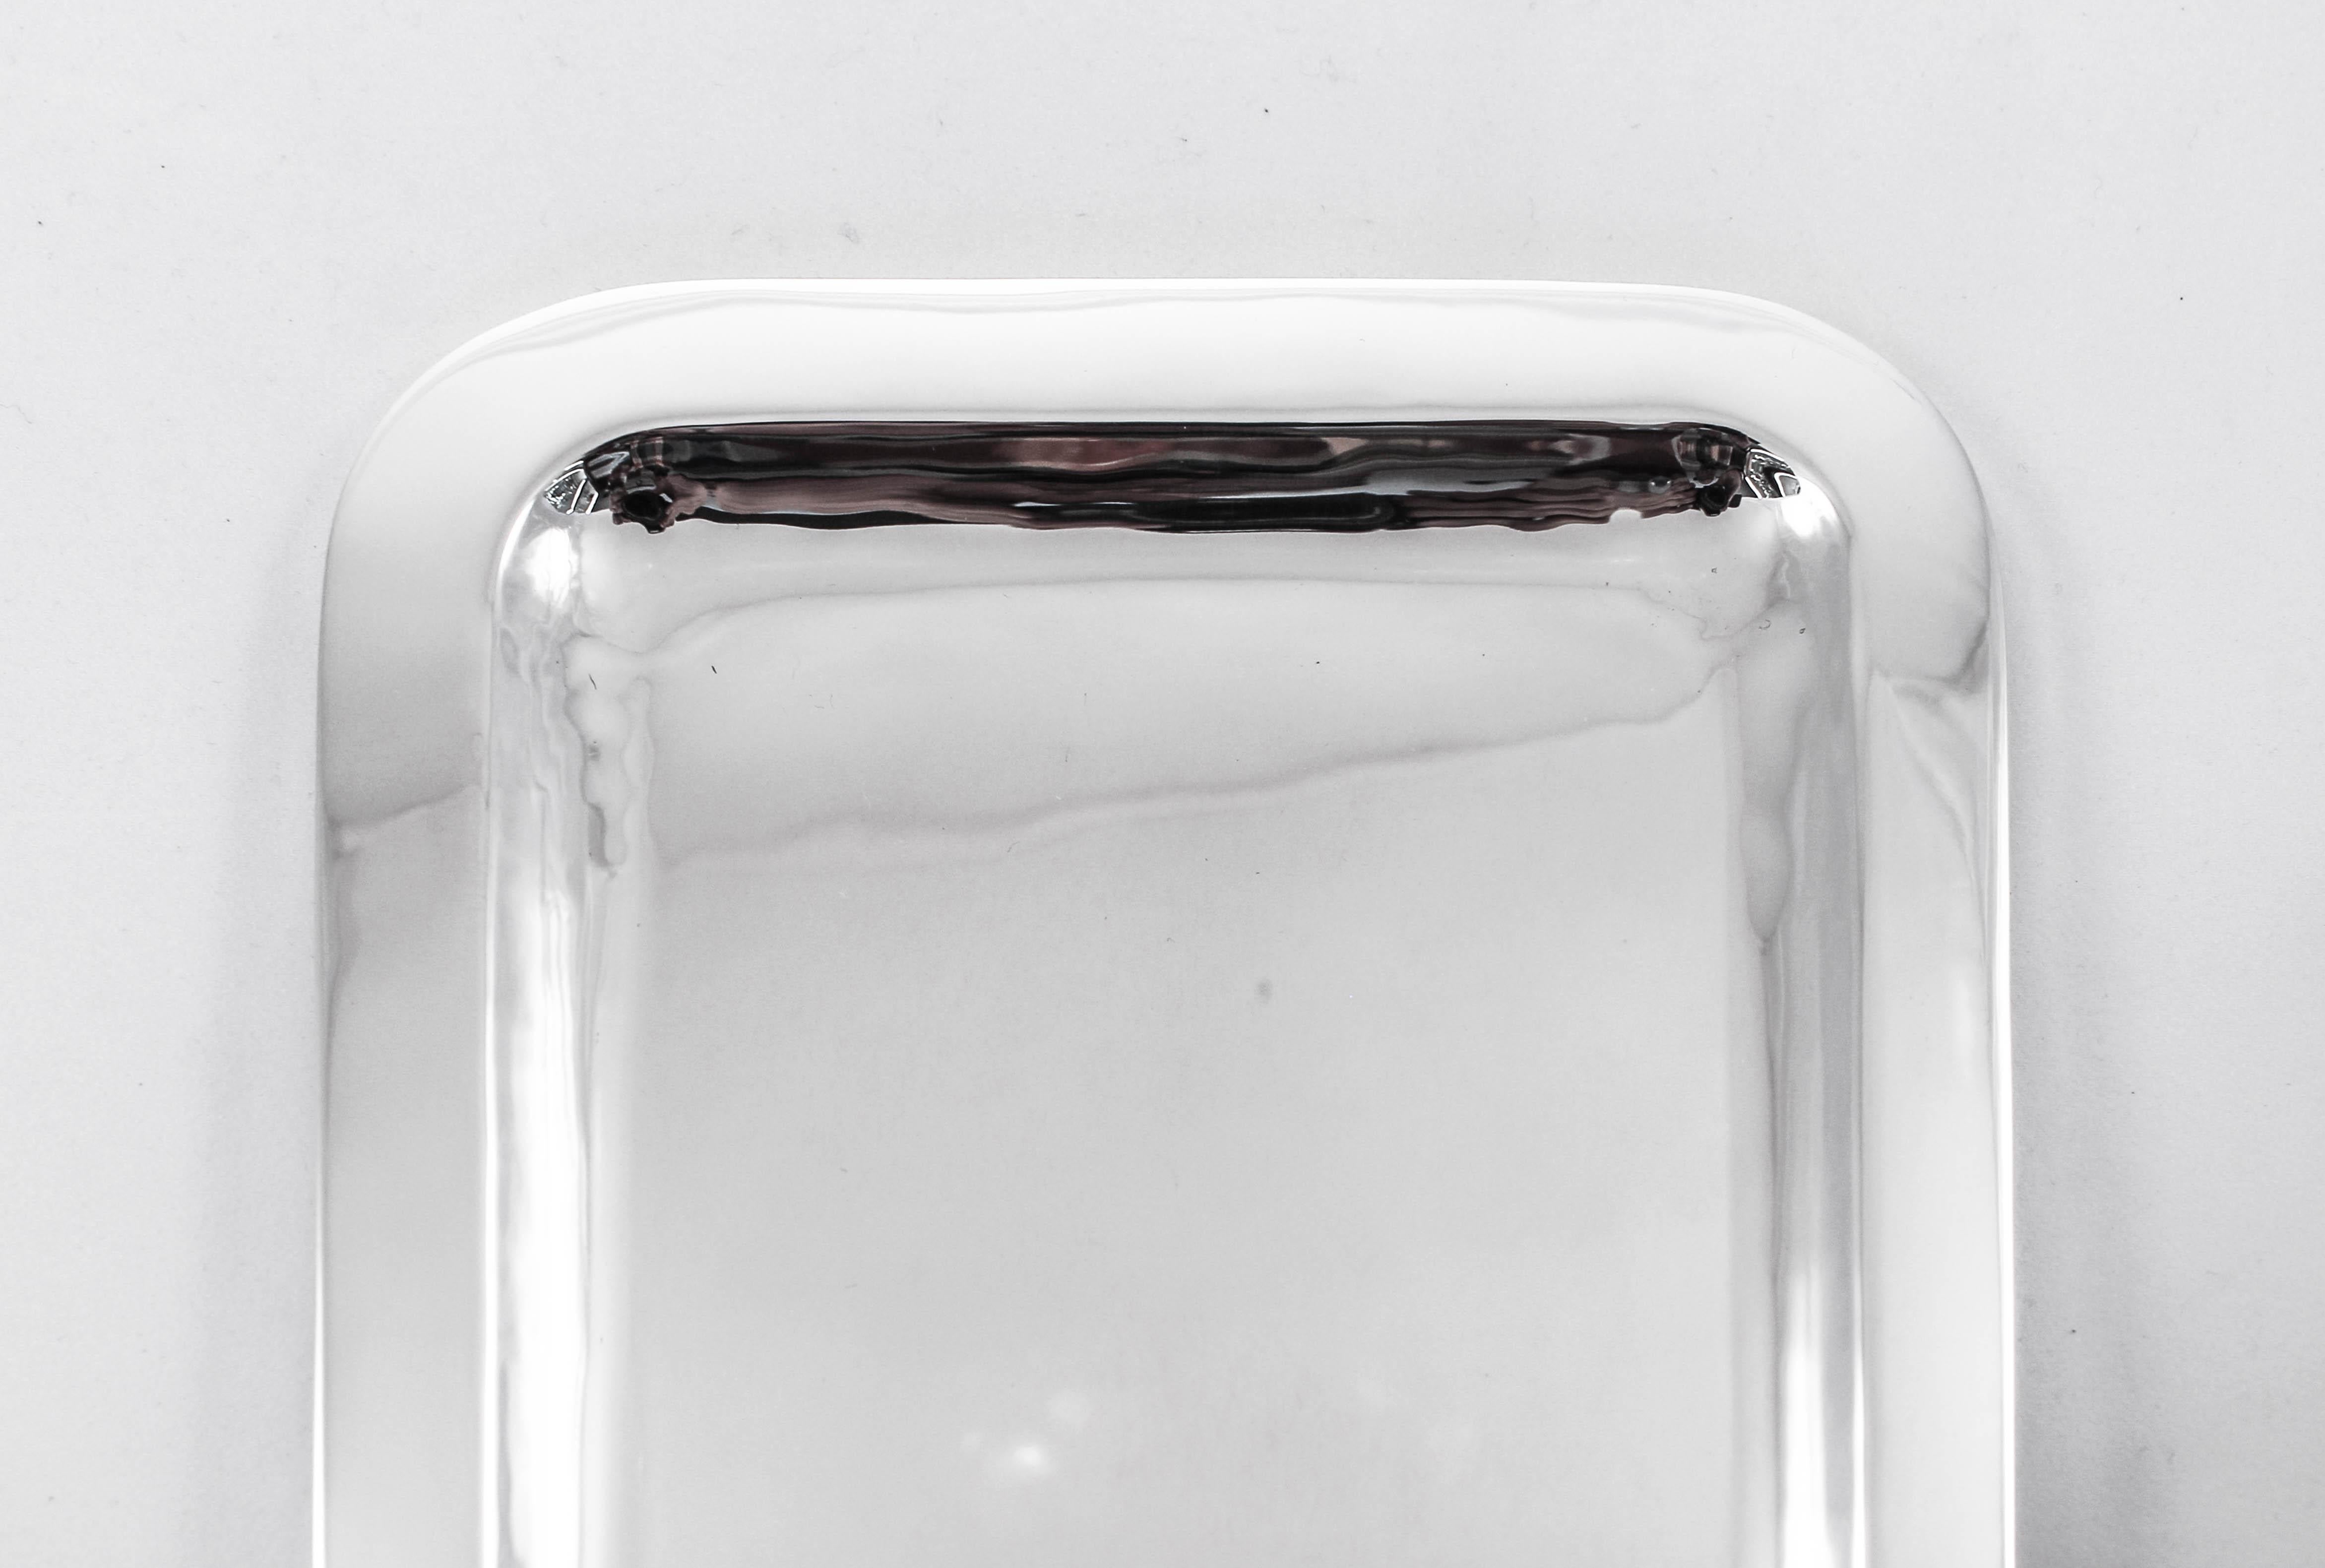 We are happy to offer this sterling silver tray for sale. The 1950s and 1960s were the height of the midcentury movement. An era that saw a resurgence of glamour and contemporary experimentation. This piece is sleek and modern; no etchings or any